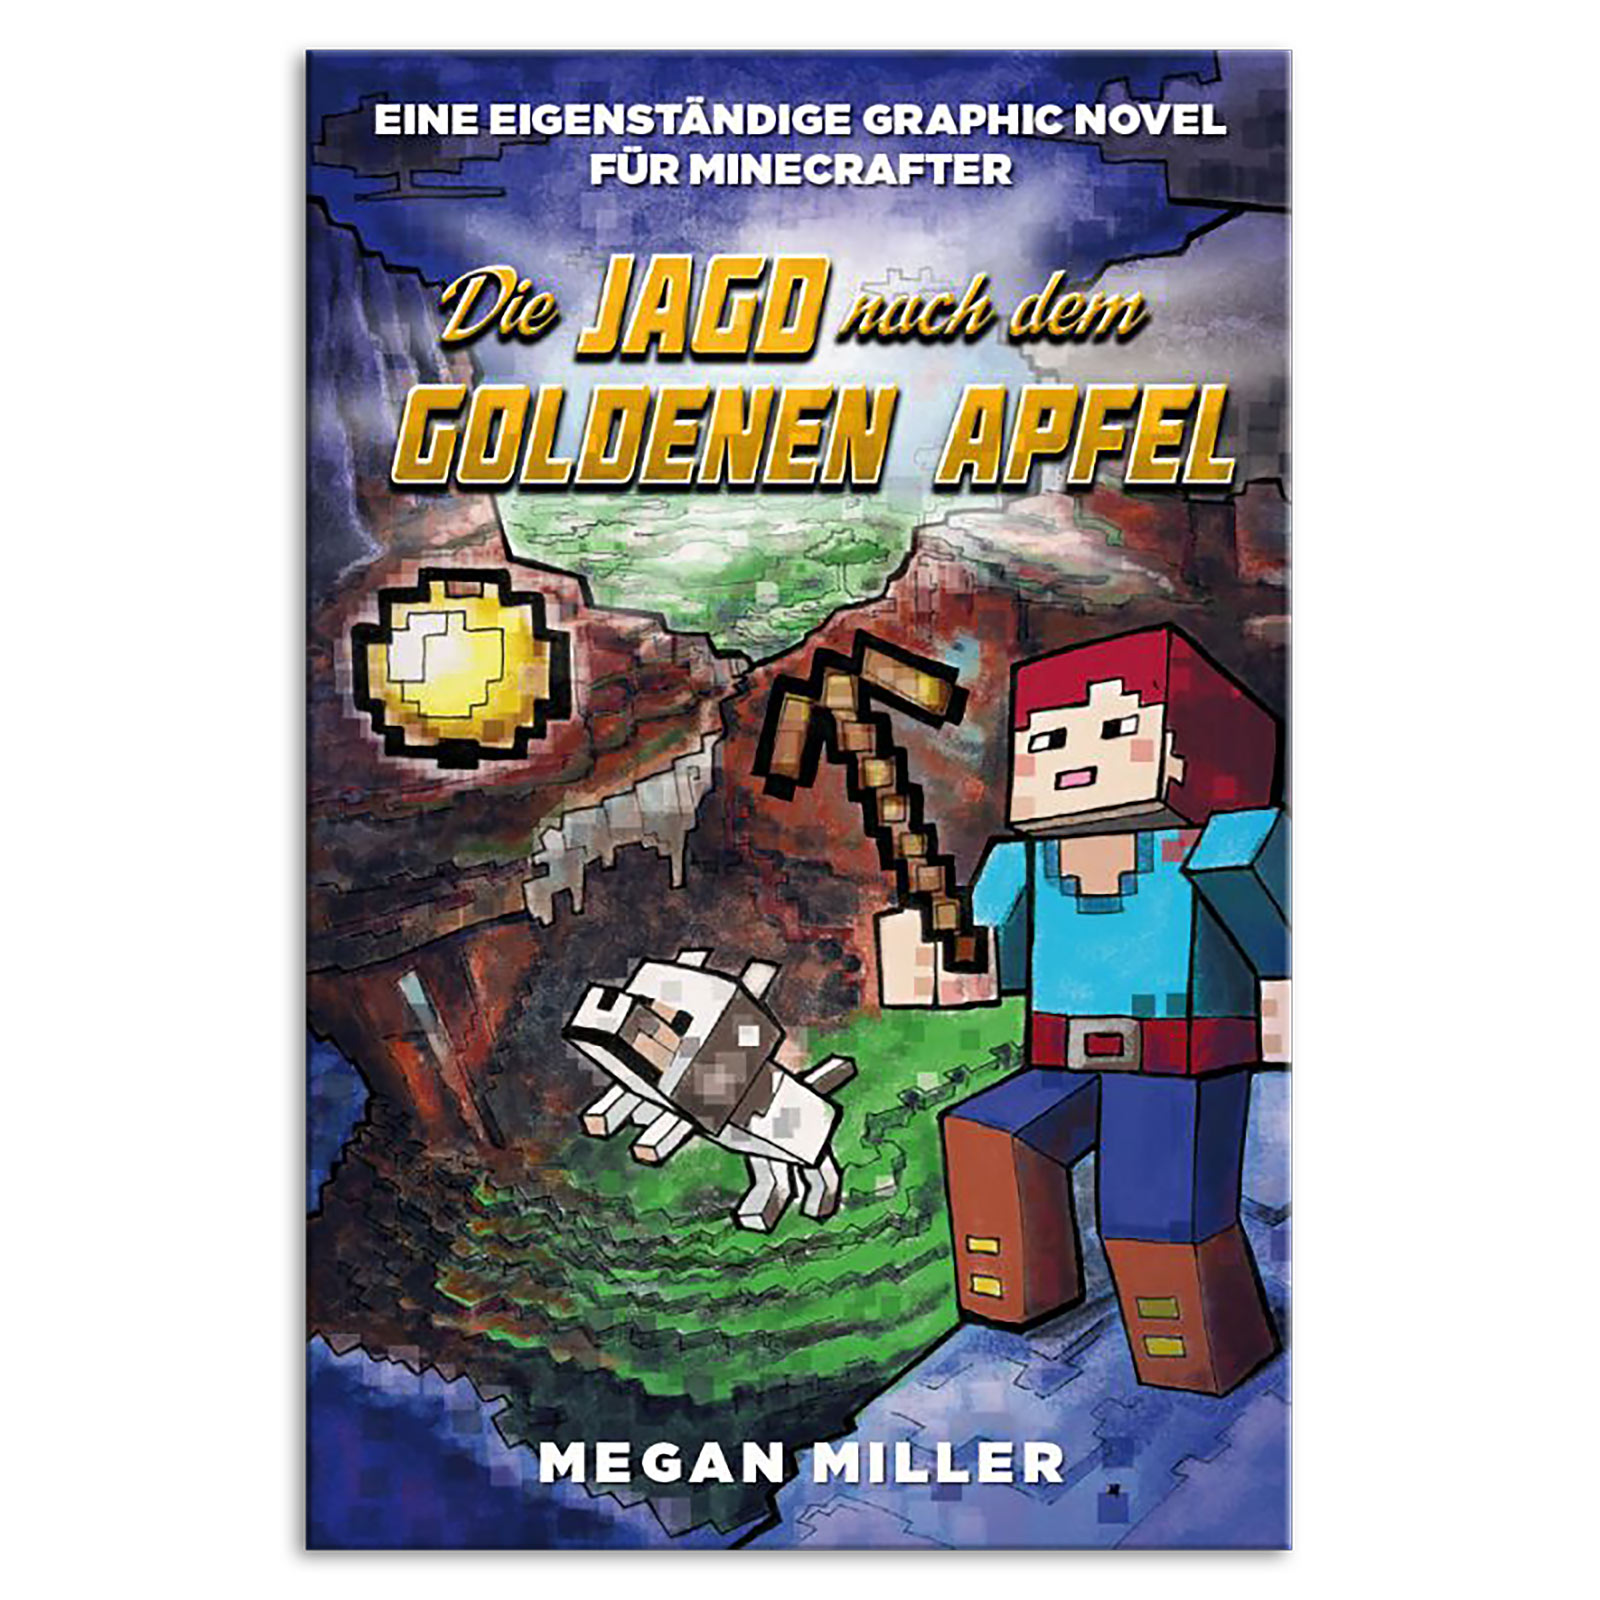 The Hunt for the Golden Apple - Graphic Novel for Minecrafters